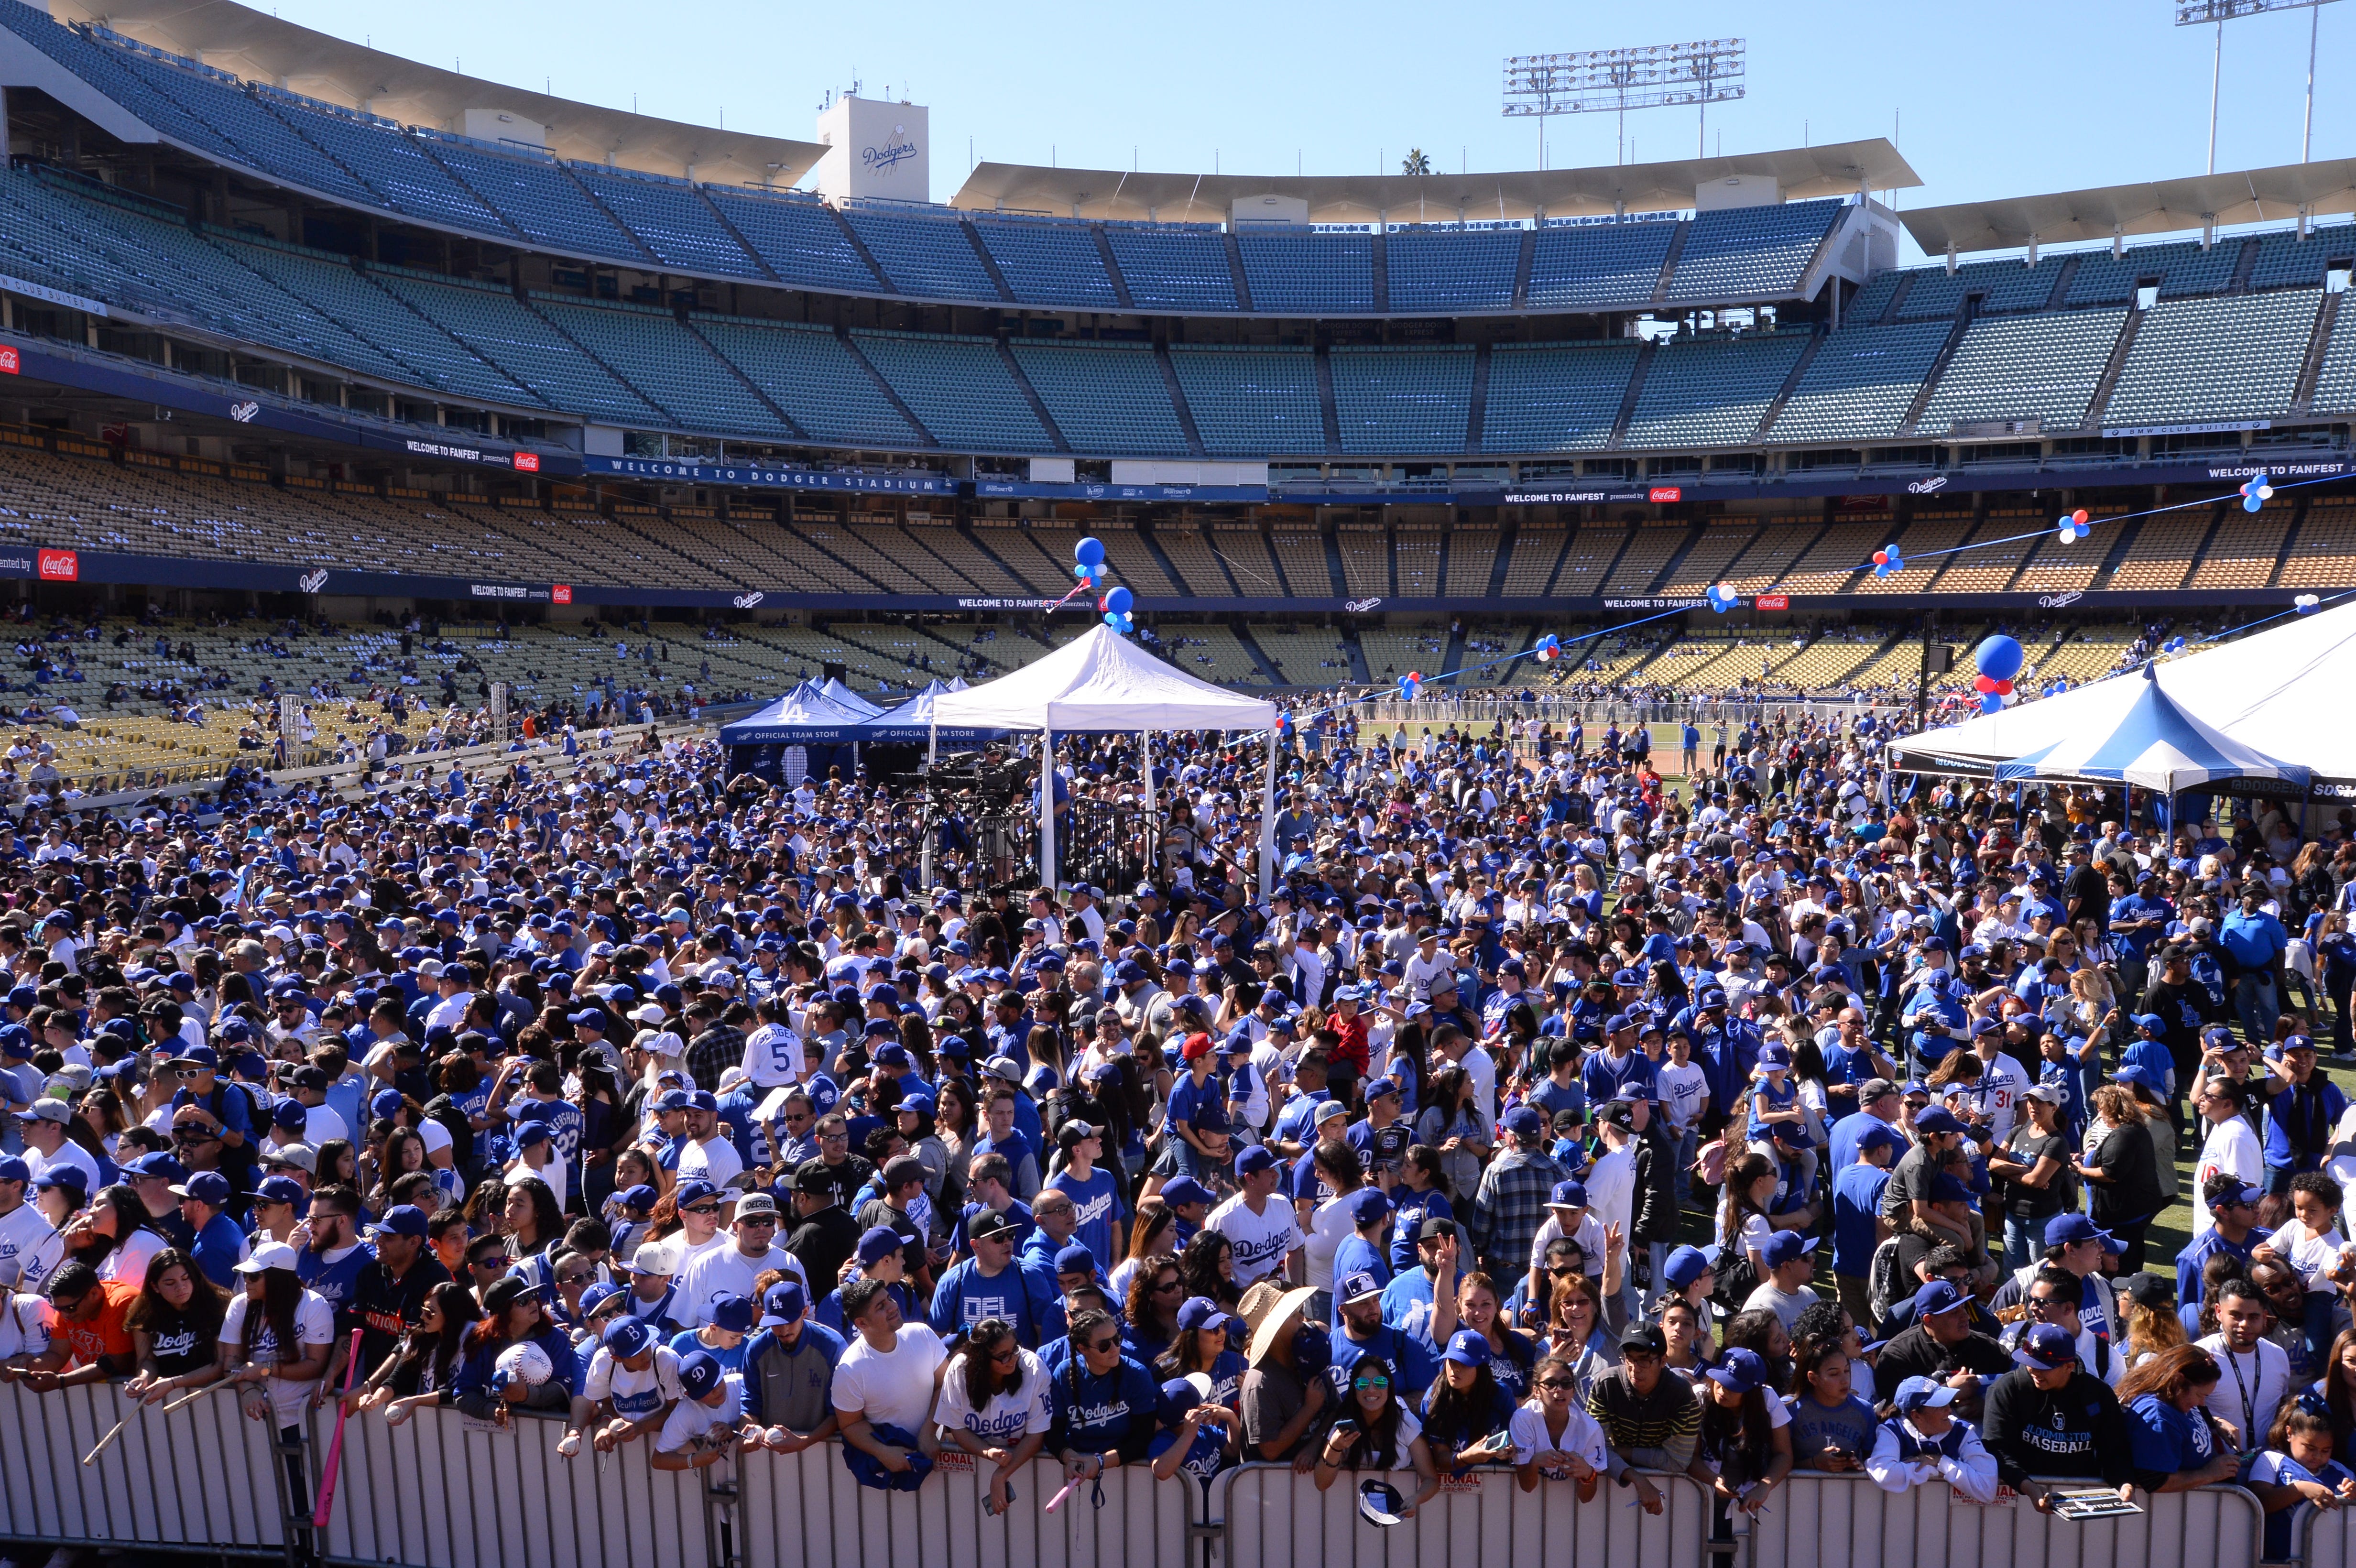 Dodgers Stadium to Host FanFest for the First Time Since 2020